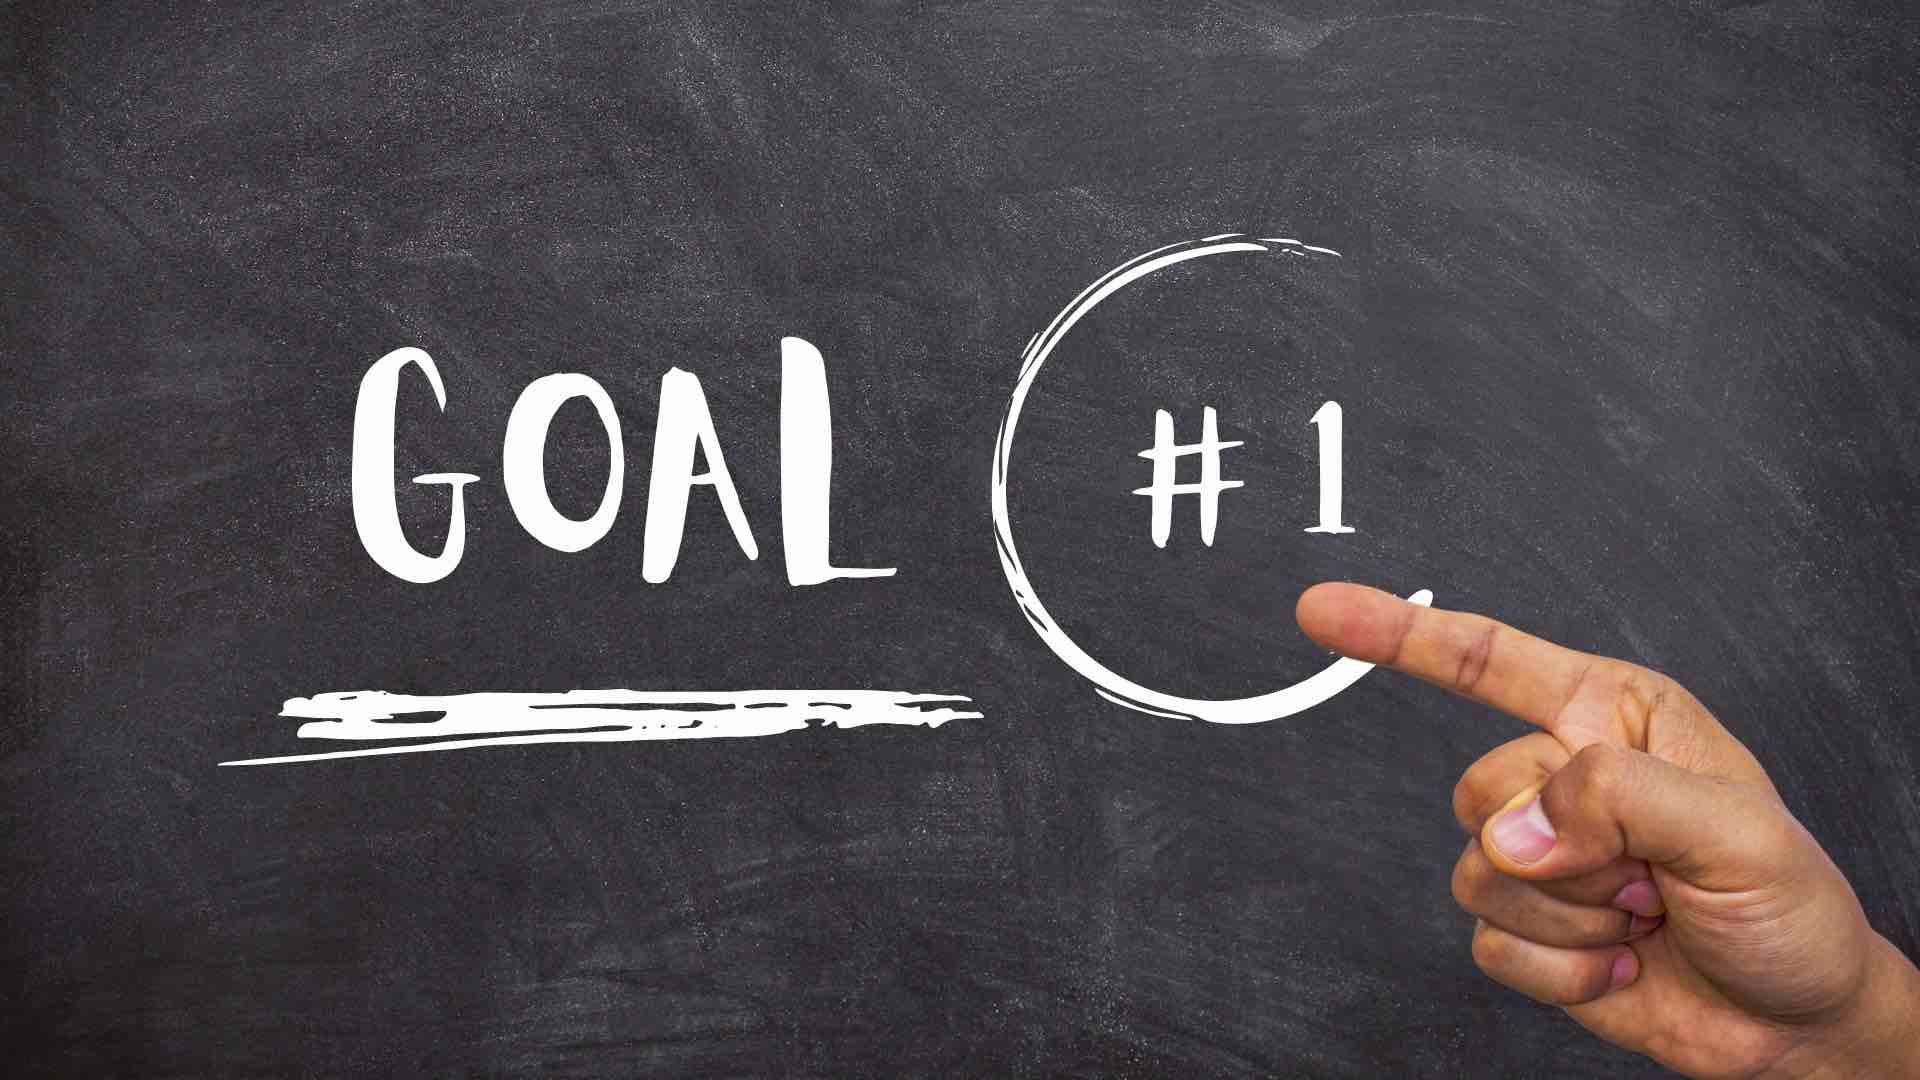 Setting goals can change your life